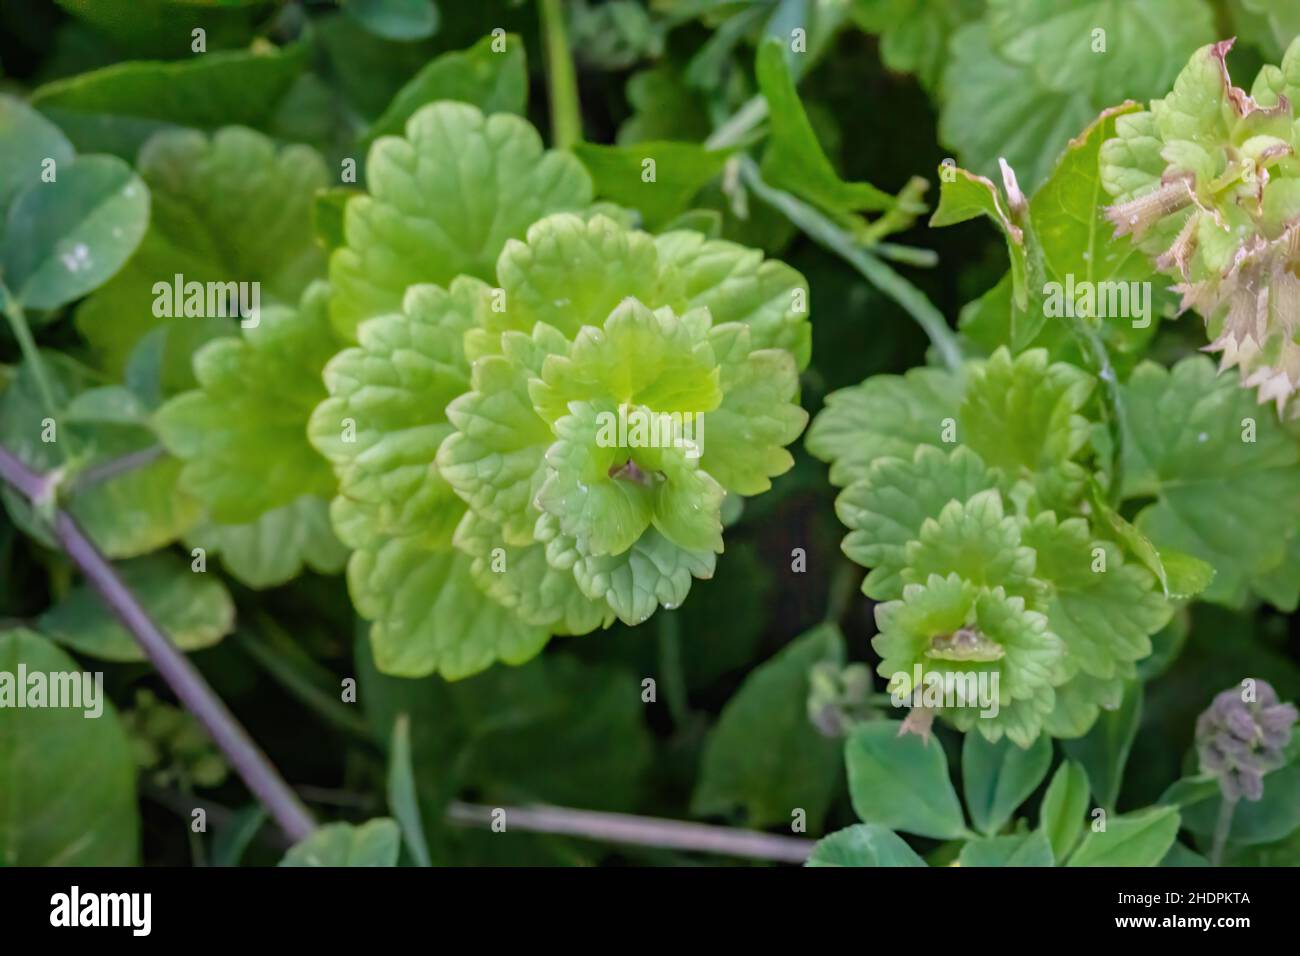 Creeping charlie. which is an edible plant. Bitter and minty tasting - nice in a salad, and makes a mild and delicious tea. Stock Photo